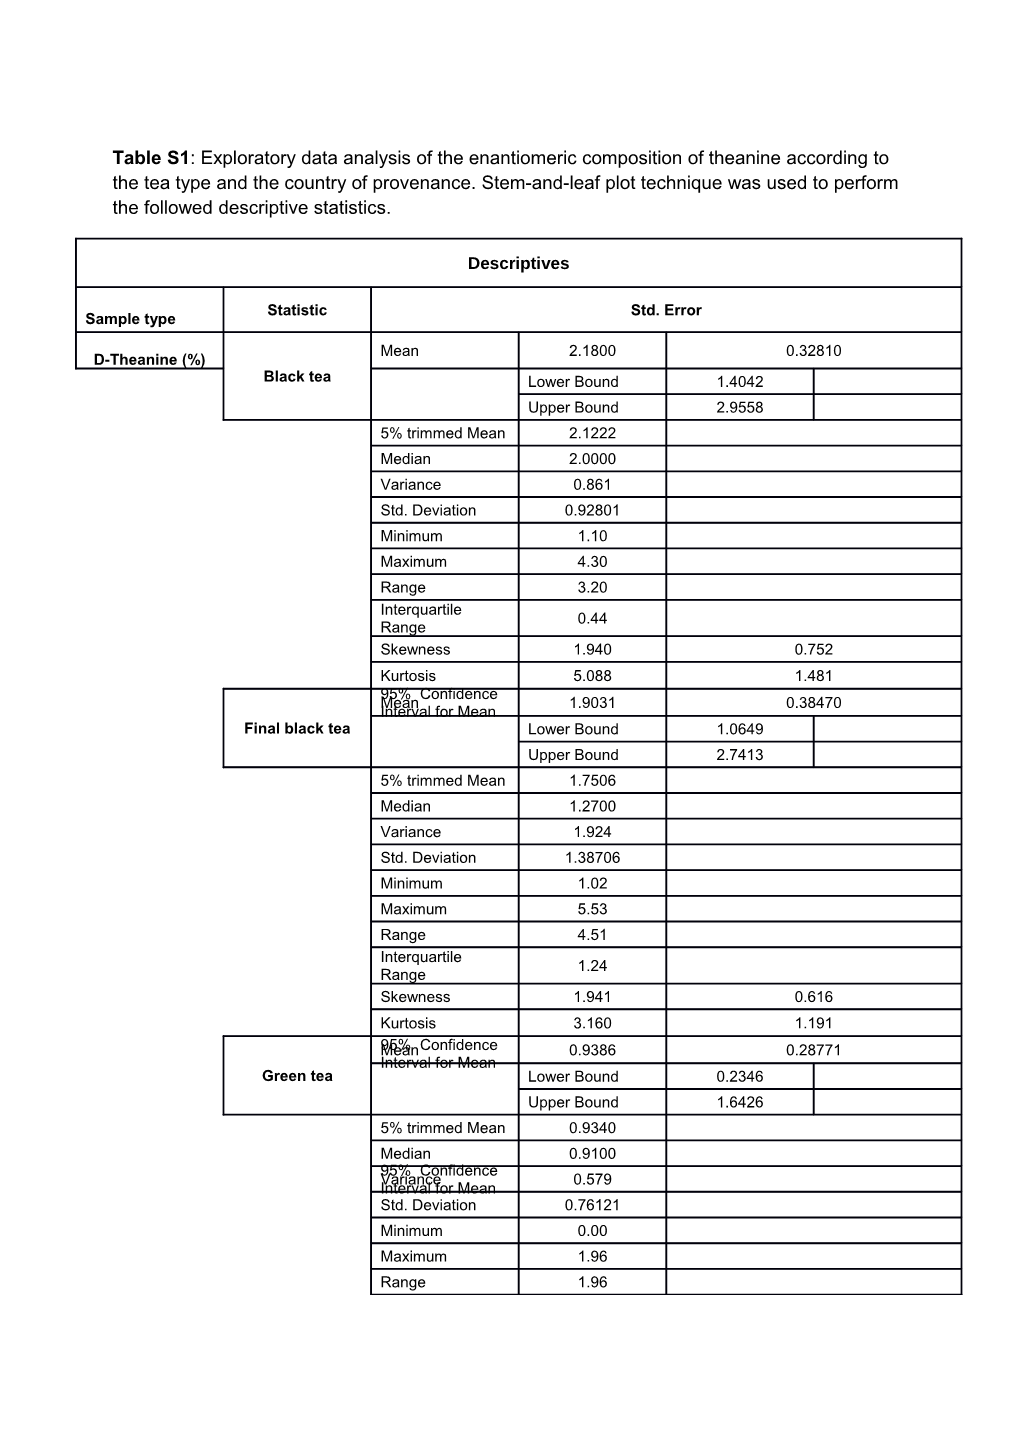 Table S1: Exploratory Data Analysis of the Enantiomeric Composition of Theanine According